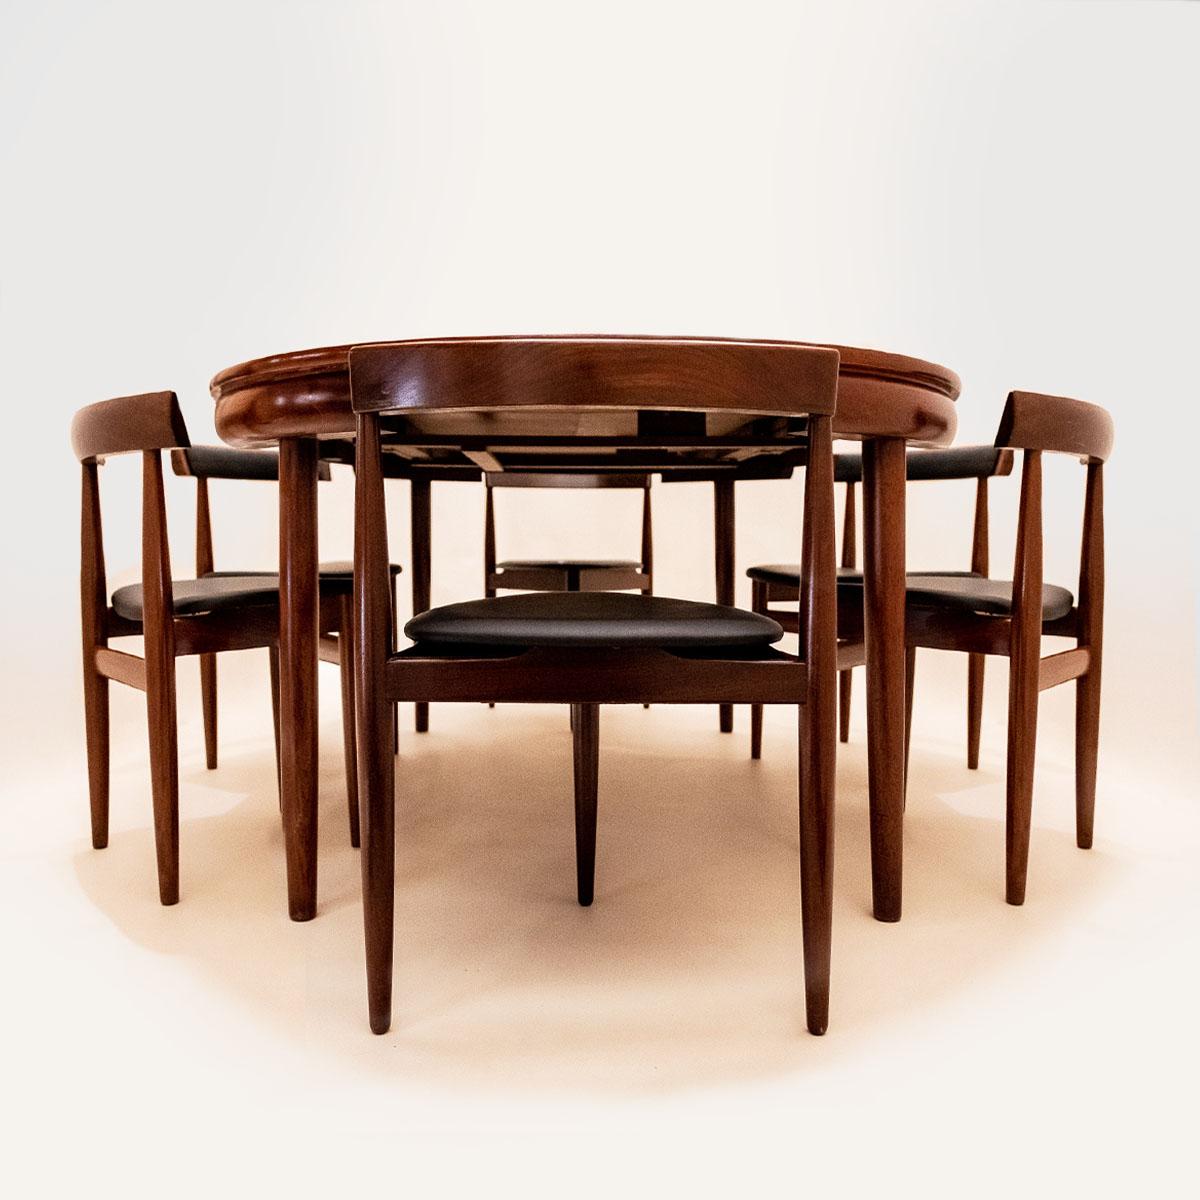 Mid-Century Modern Danish Mid Century Hans Olsen Roundette Dining Set with 6 Chairs by Frem Røjle